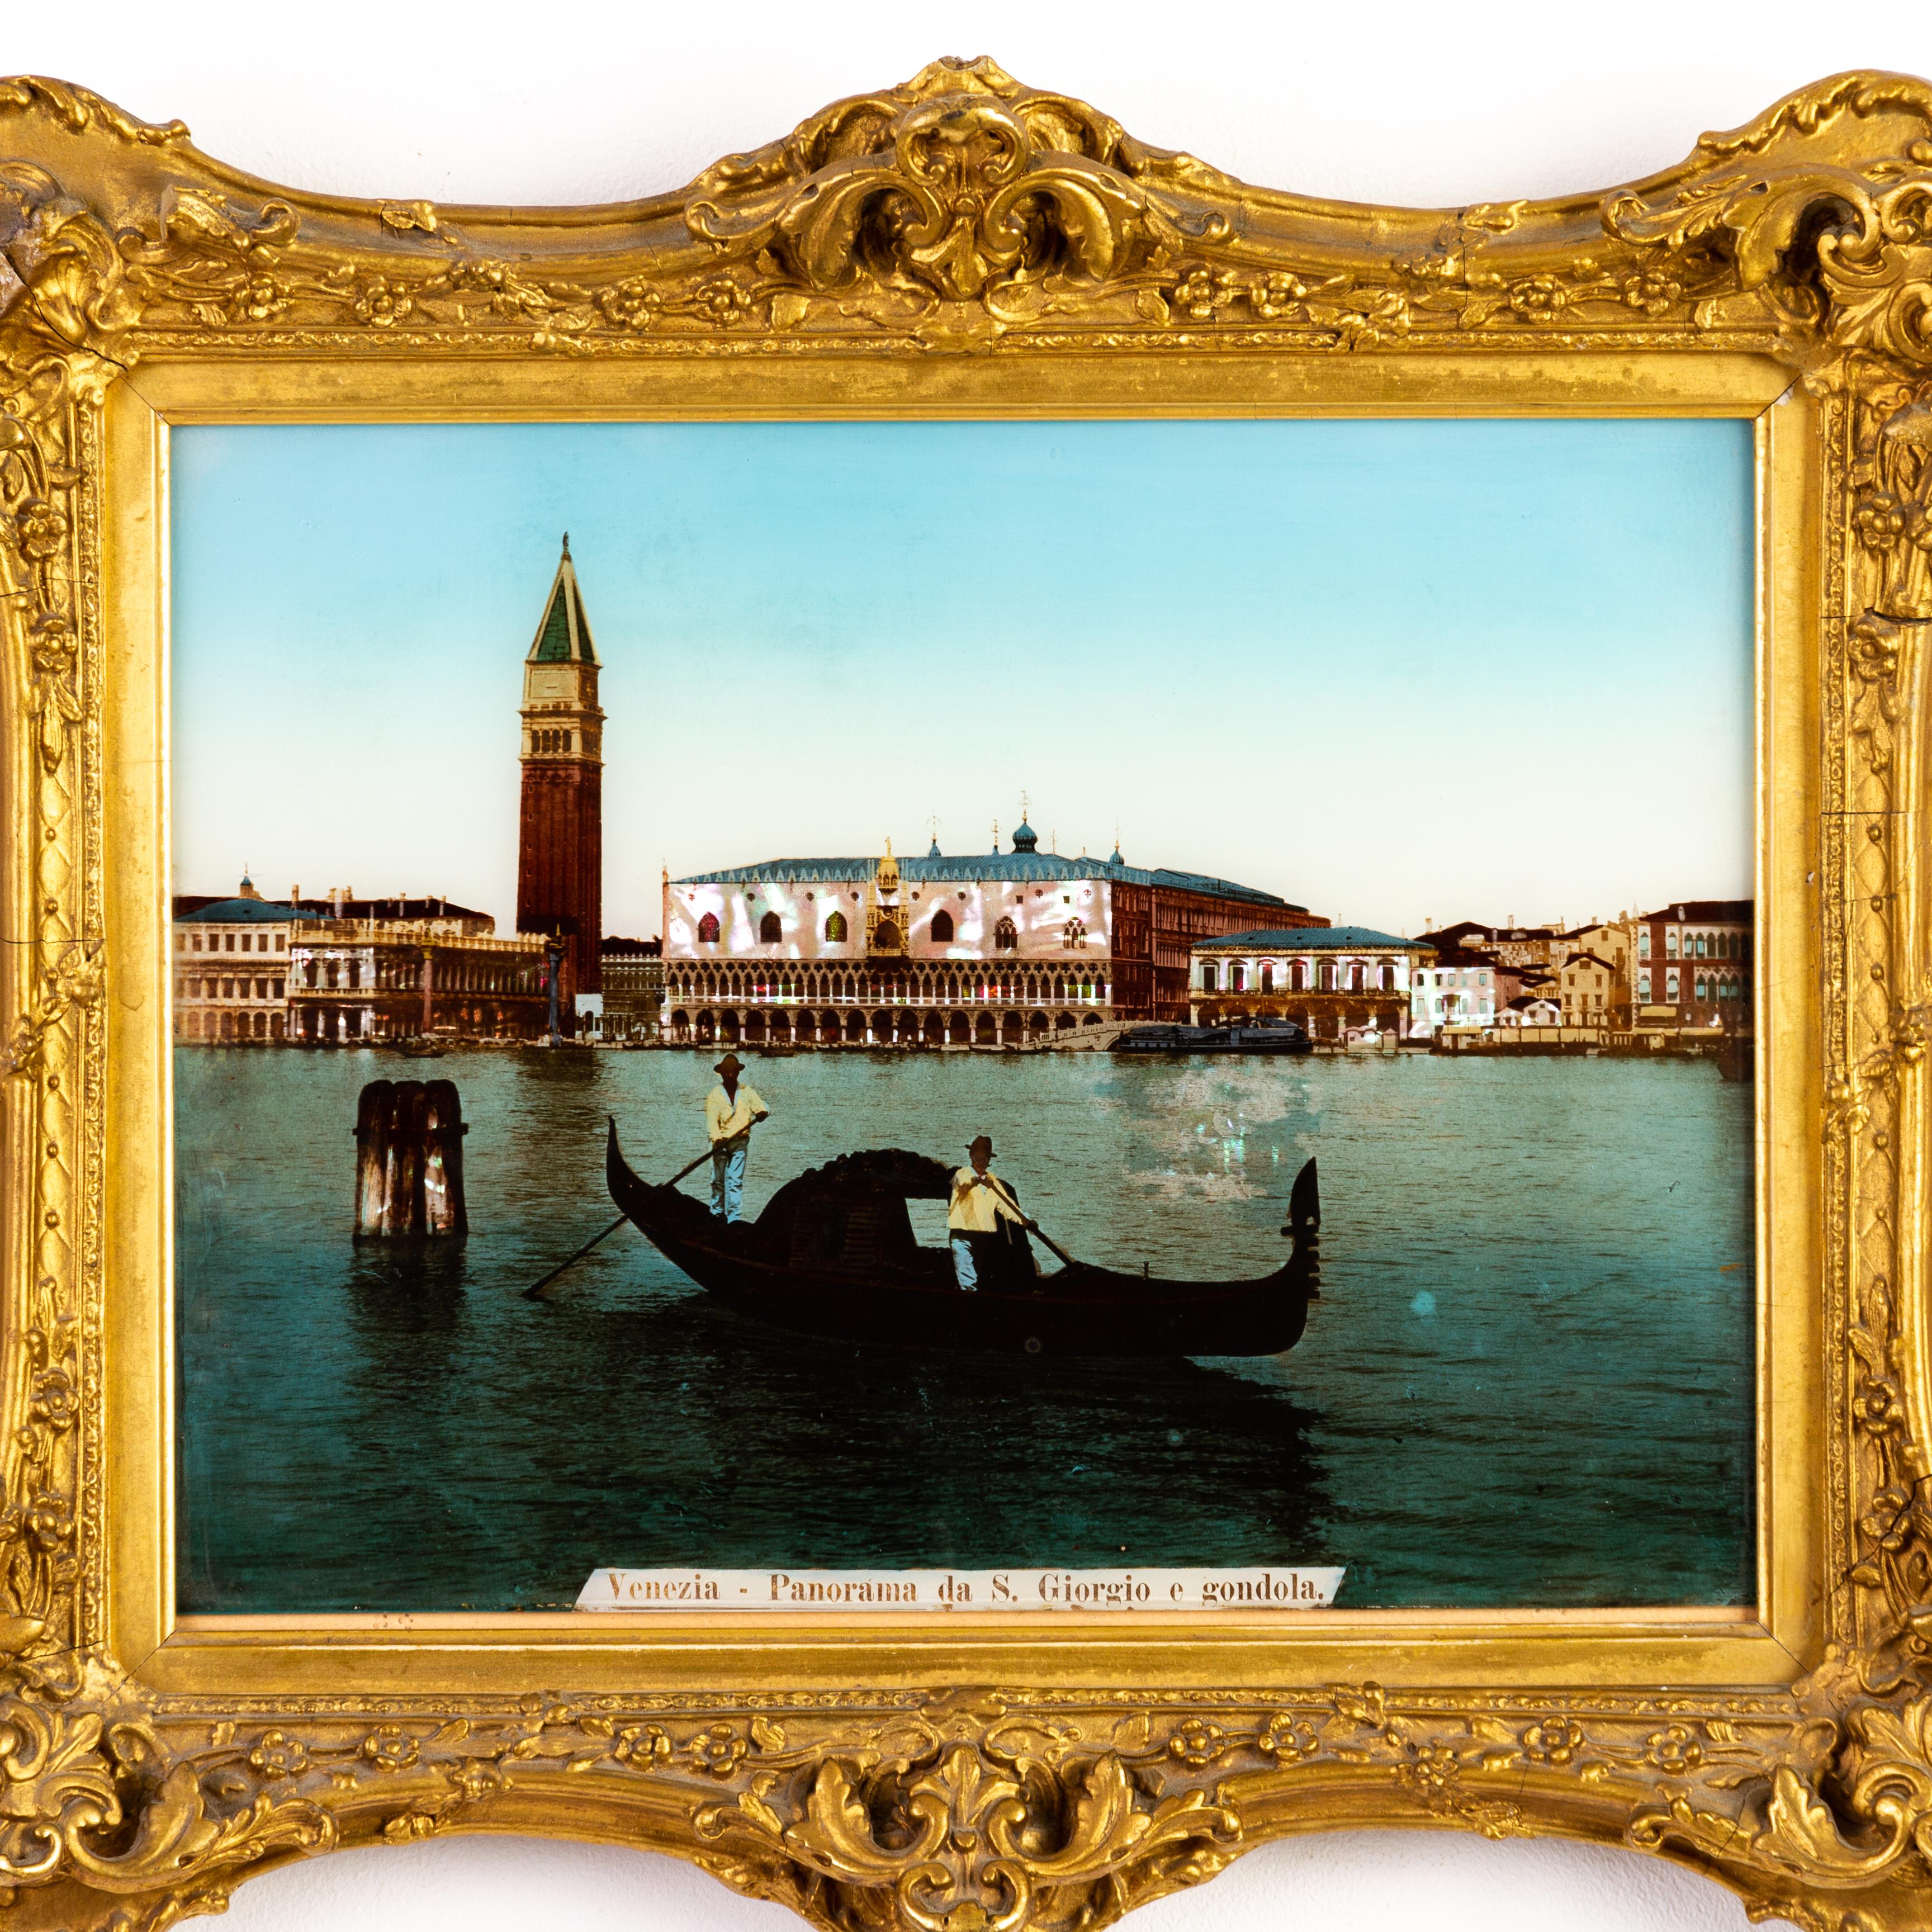 In good condition
From a private collection
Free international shipping
Mother of Pearl Crystoleum of Venetian Gondola 